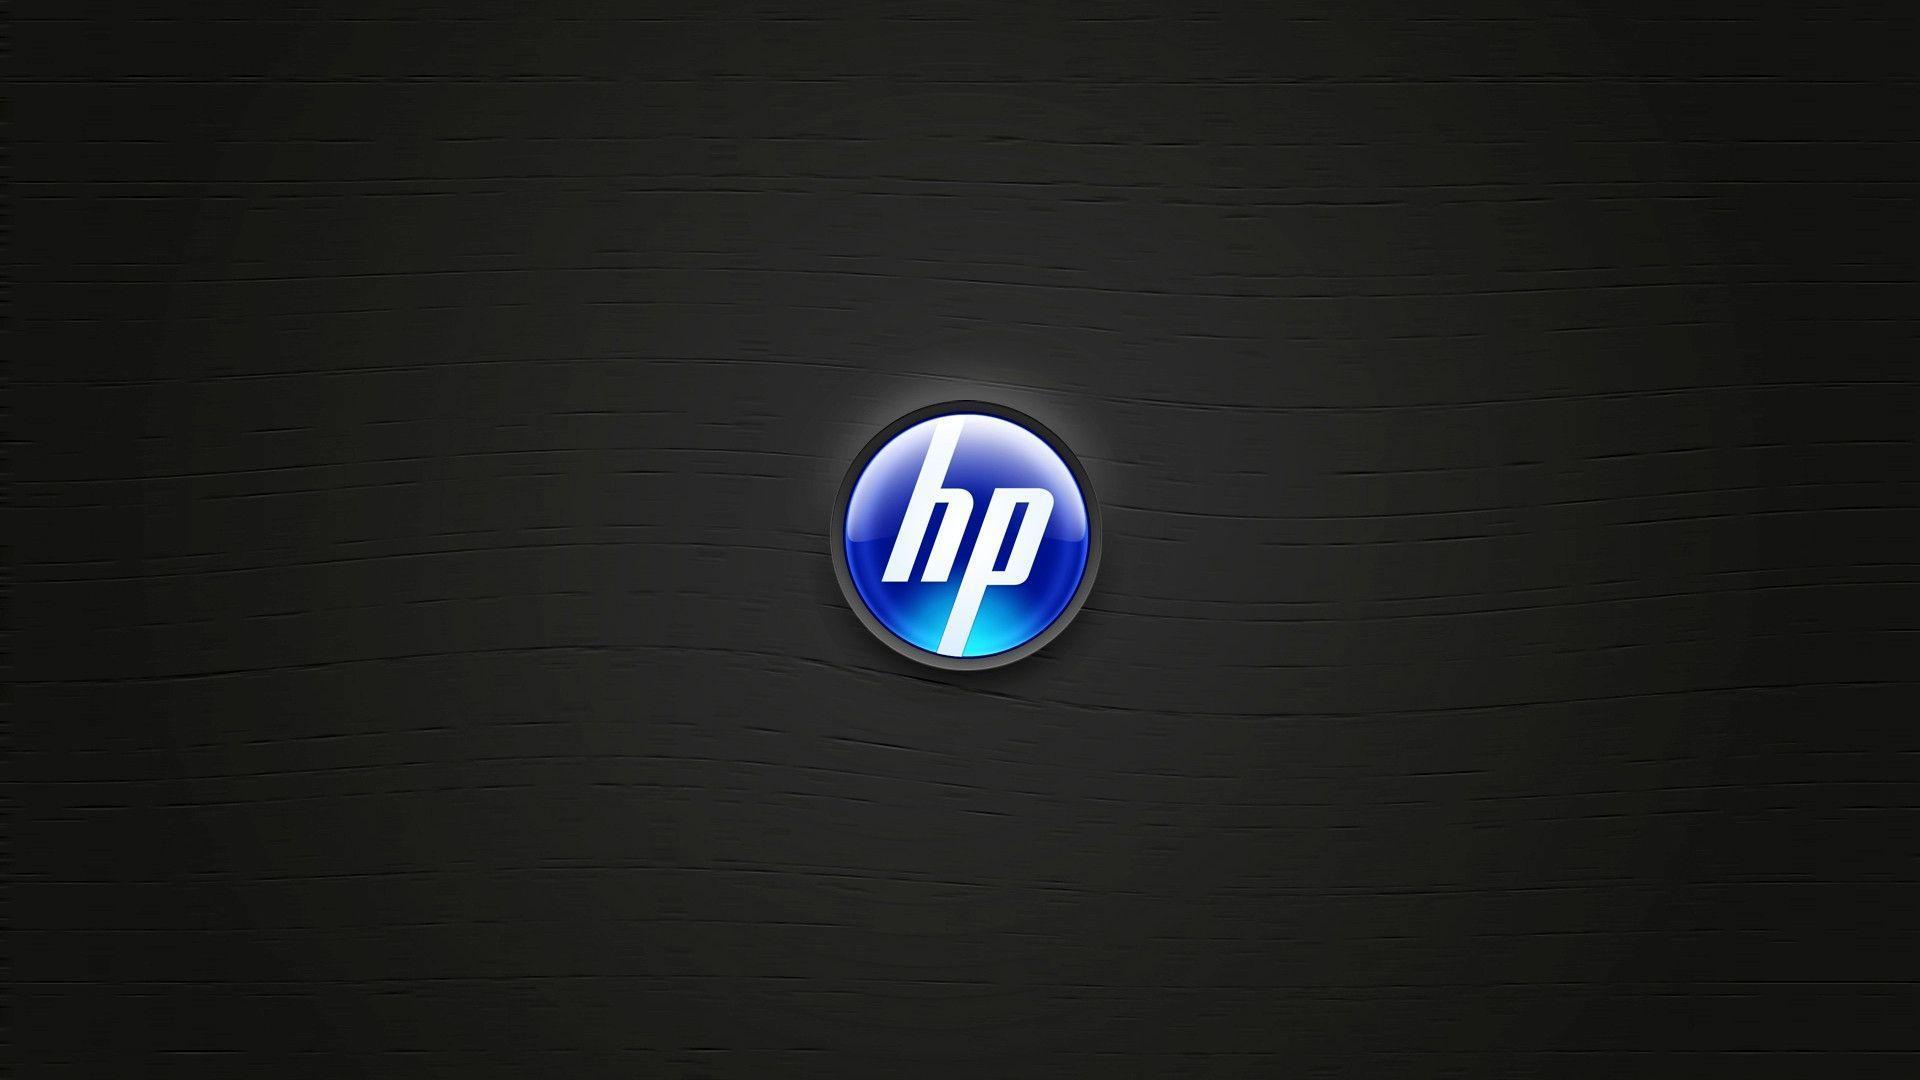 HP Hd Wallpapers Free Download, HP, Other